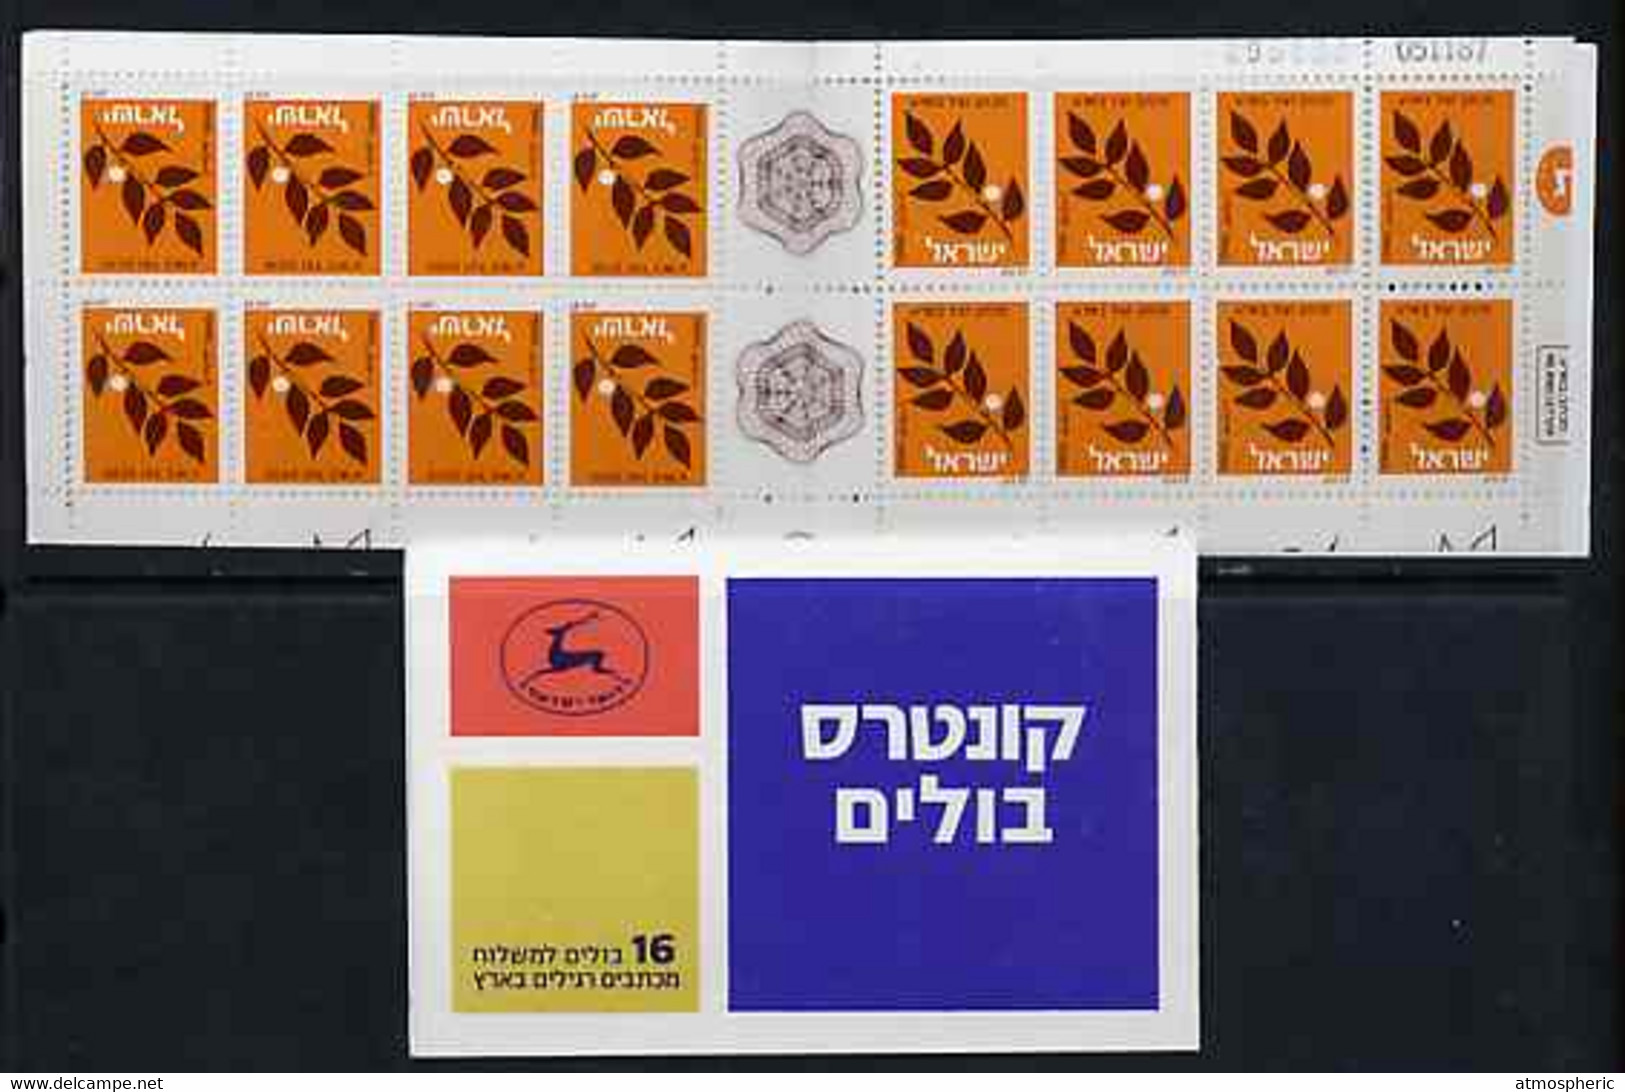 Booklet - Israel 1984-91 Branch (undenominated) Booklet (tete-beche Pane With Bright Ult Cover) Complete And Pristine, S - Booklets